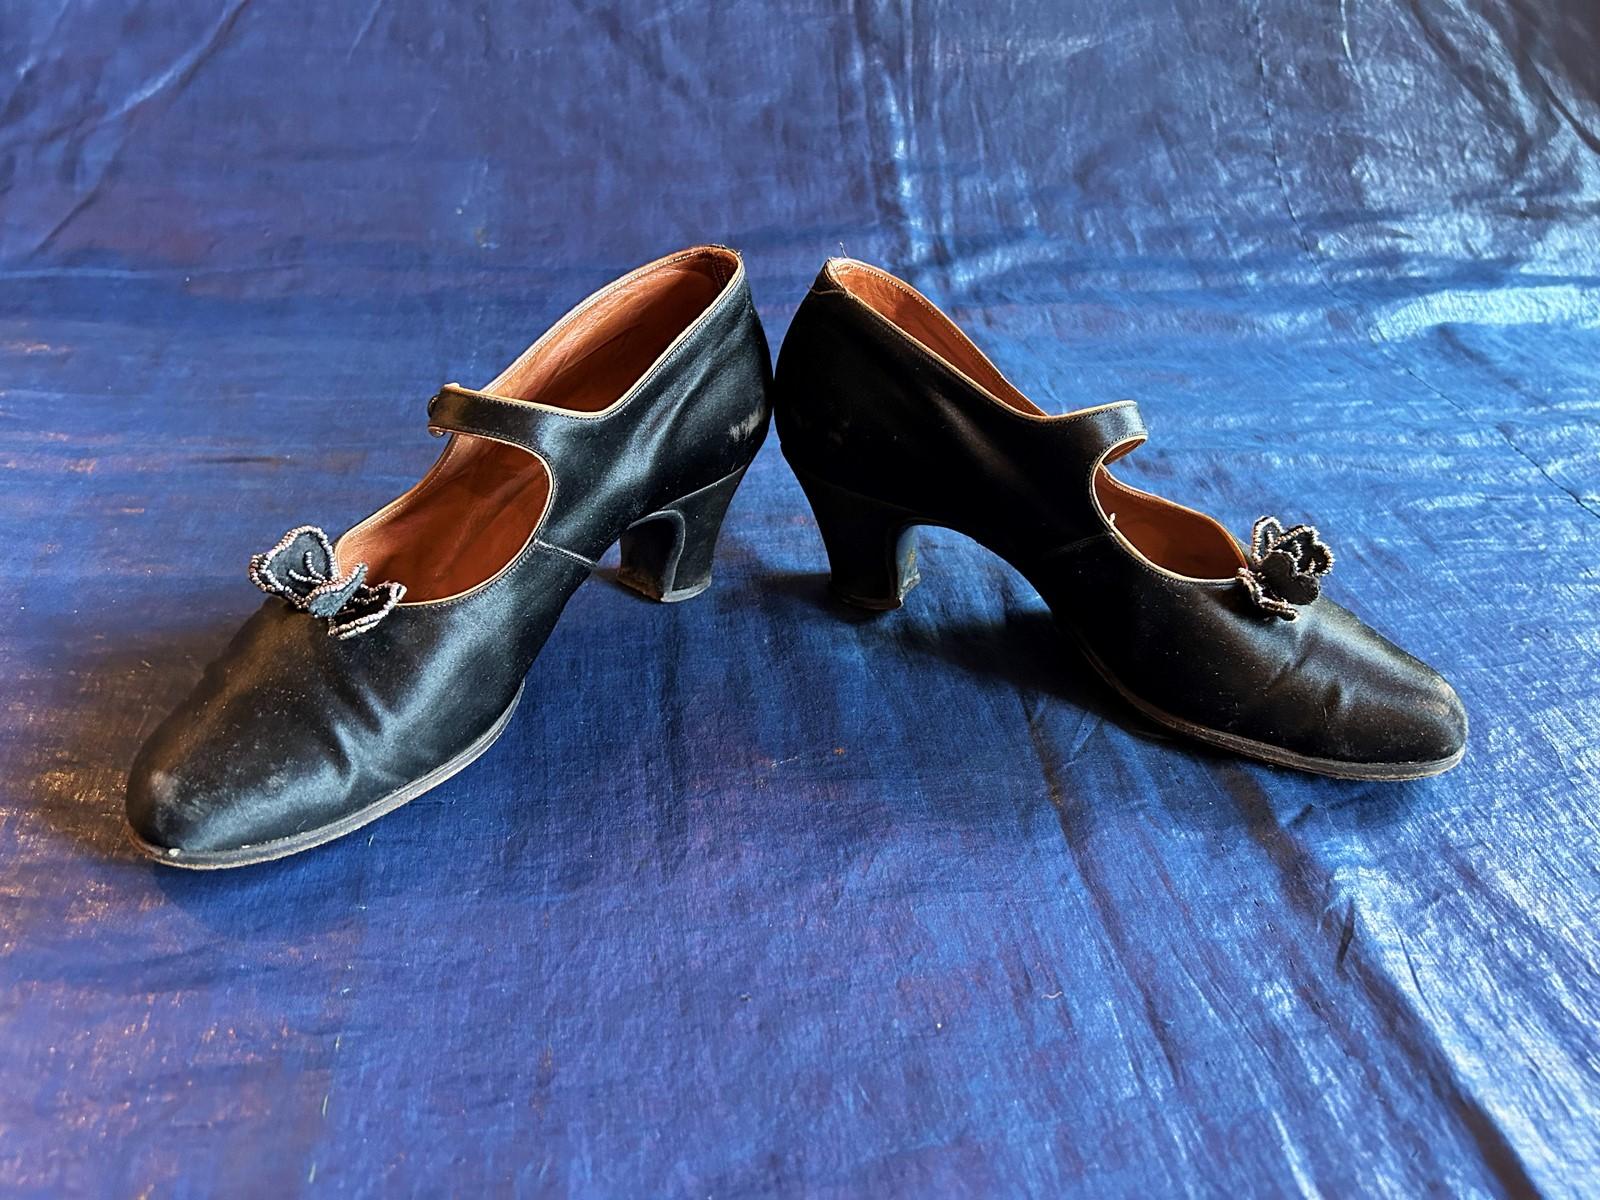 Pair of Charles IX pumps Shoes in black satin - France Circa 1920-1930 For Sale 3